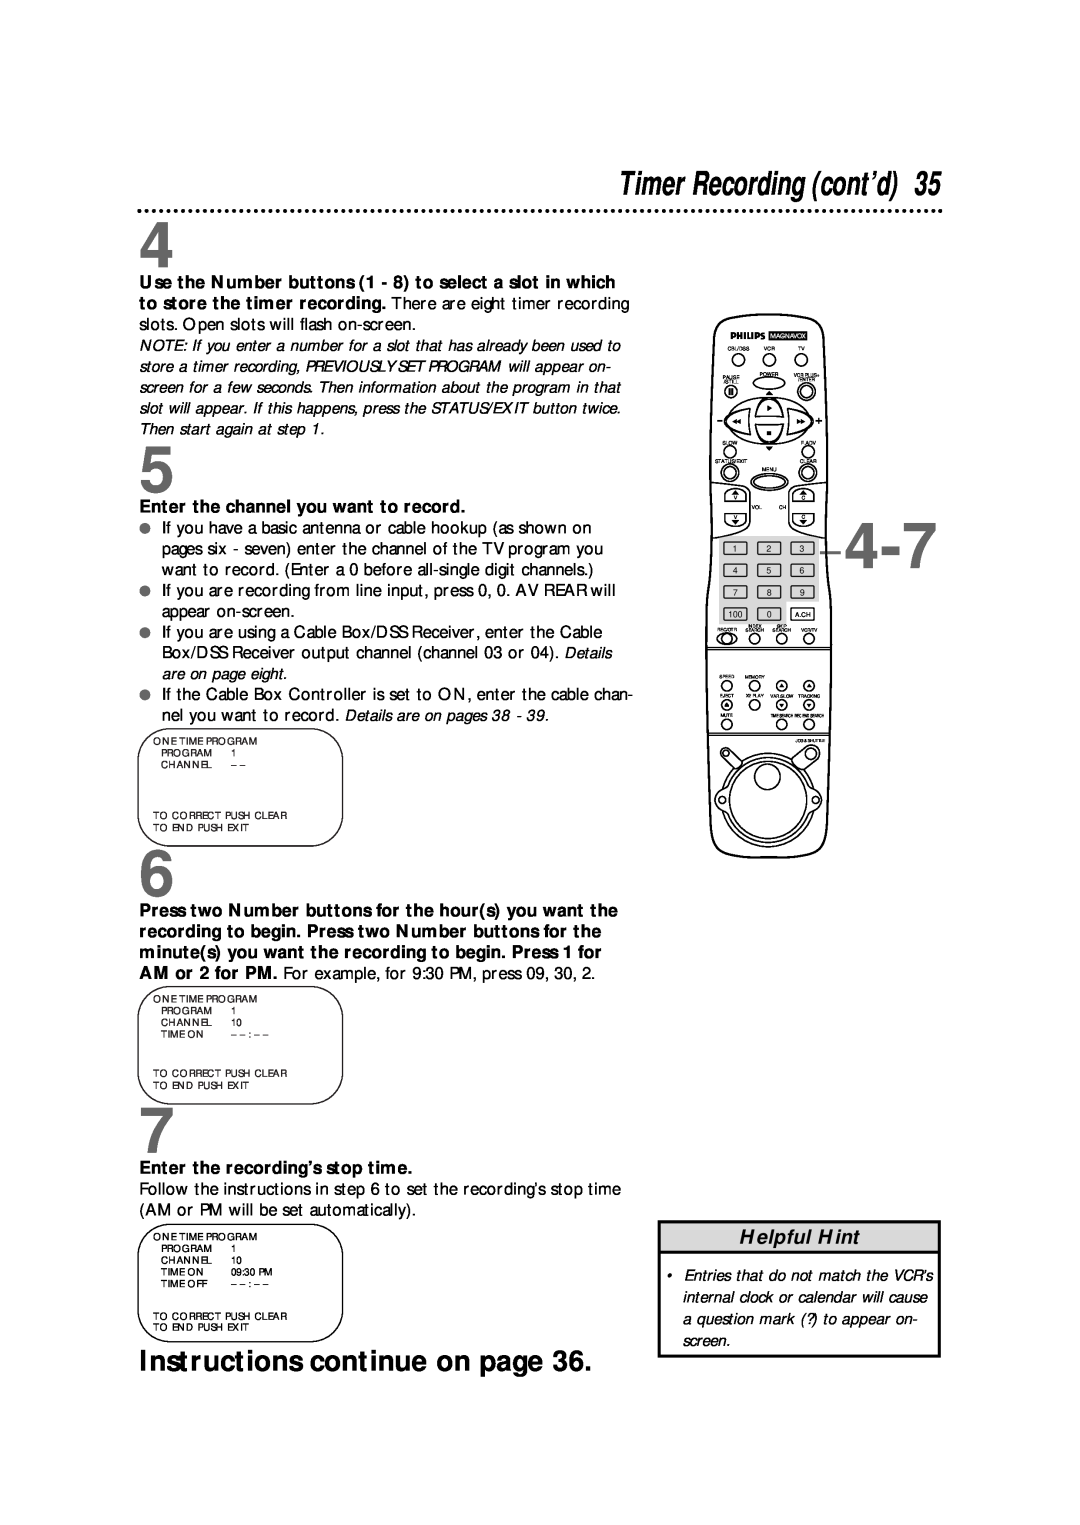 Philips VRX562AT warranty Timer Recording cont’d, Instructions continue on page, Helpful Hint 